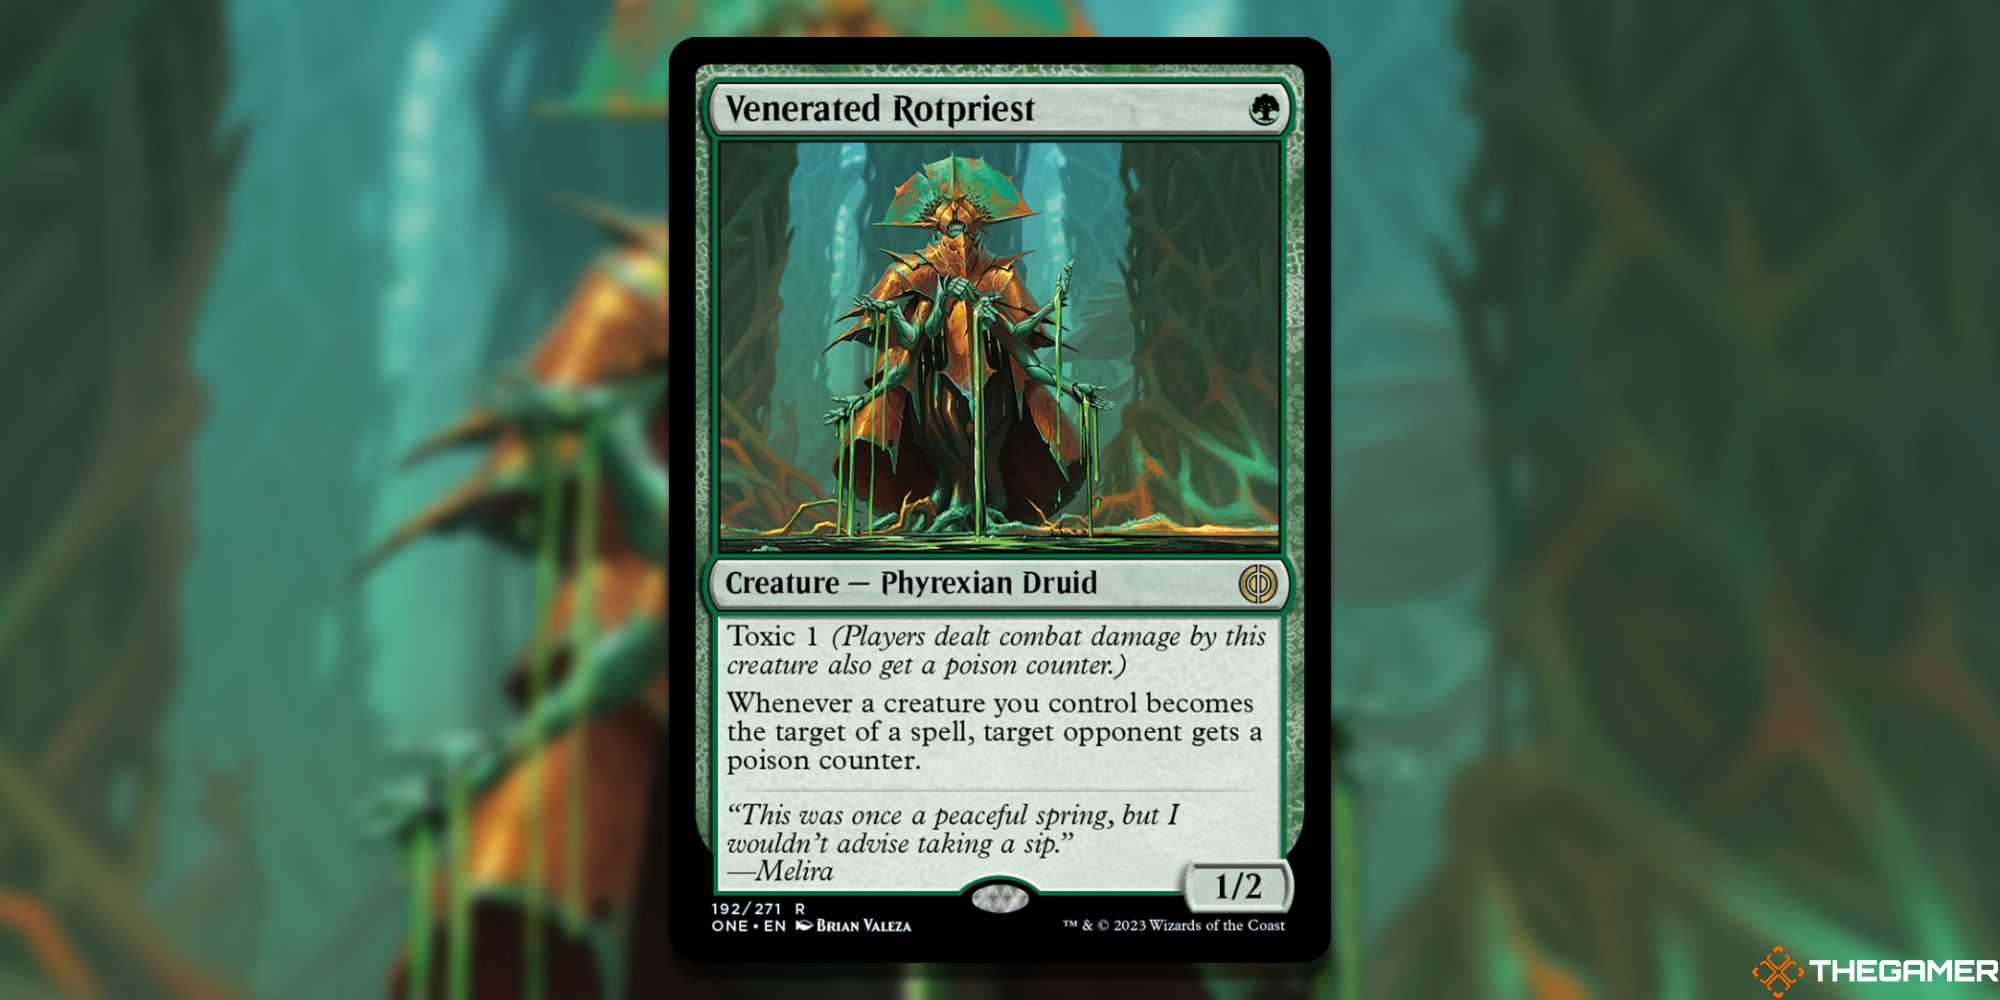 Image of the Venerated Rotpriest card in Magic: The Gathering, with art by Brian Valeza